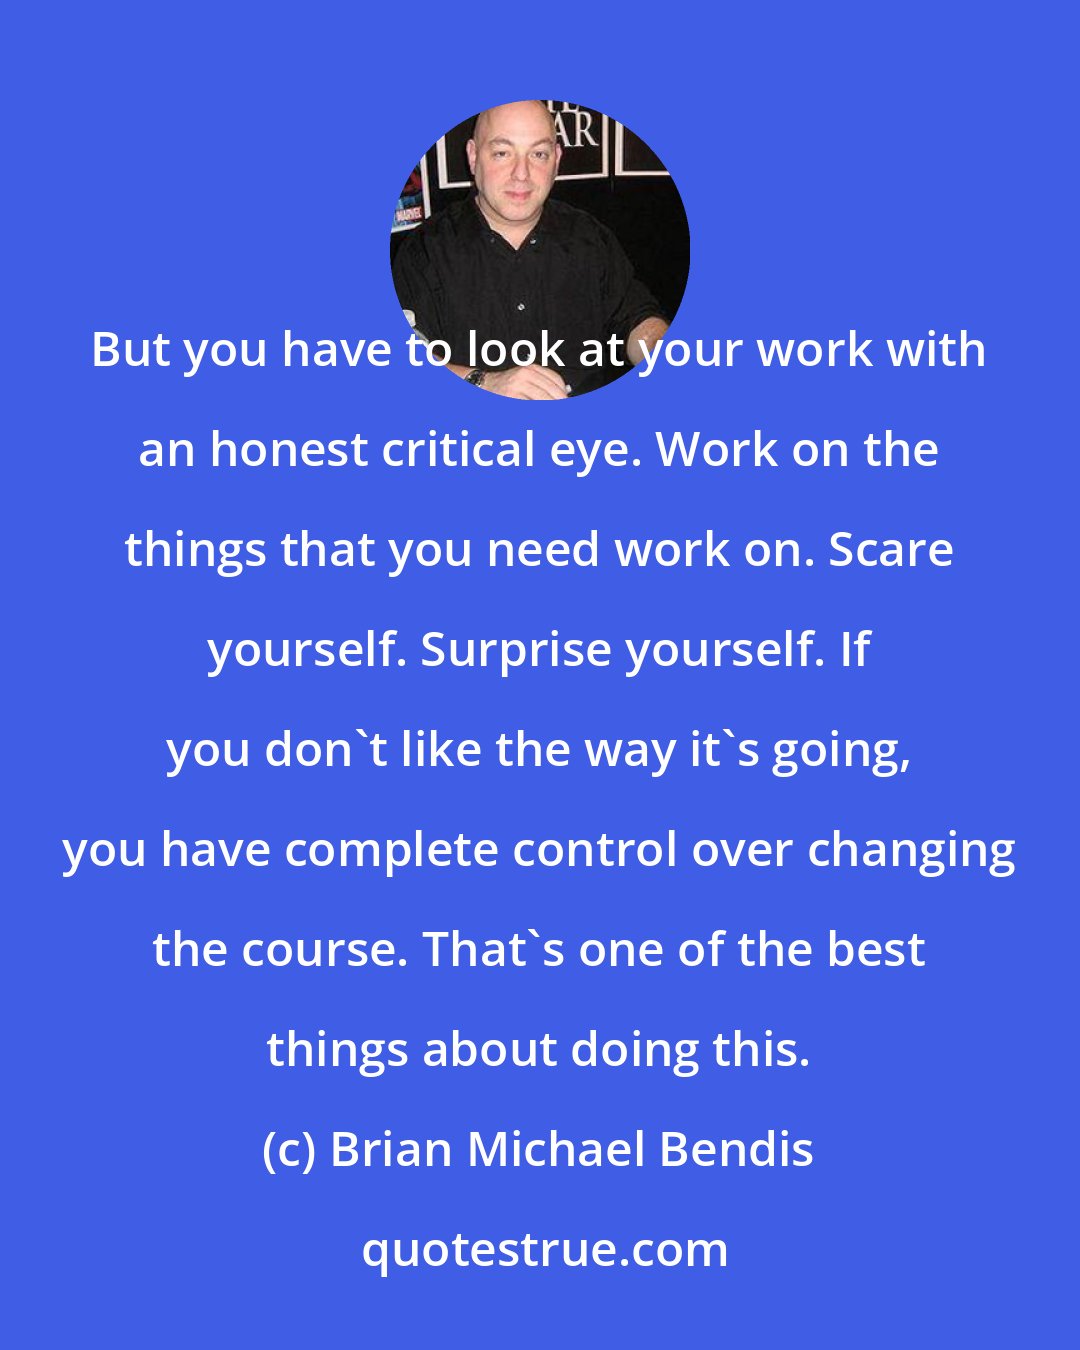 Brian Michael Bendis: But you have to look at your work with an honest critical eye. Work on the things that you need work on. Scare yourself. Surprise yourself. If you don't like the way it's going, you have complete control over changing the course. That's one of the best things about doing this.